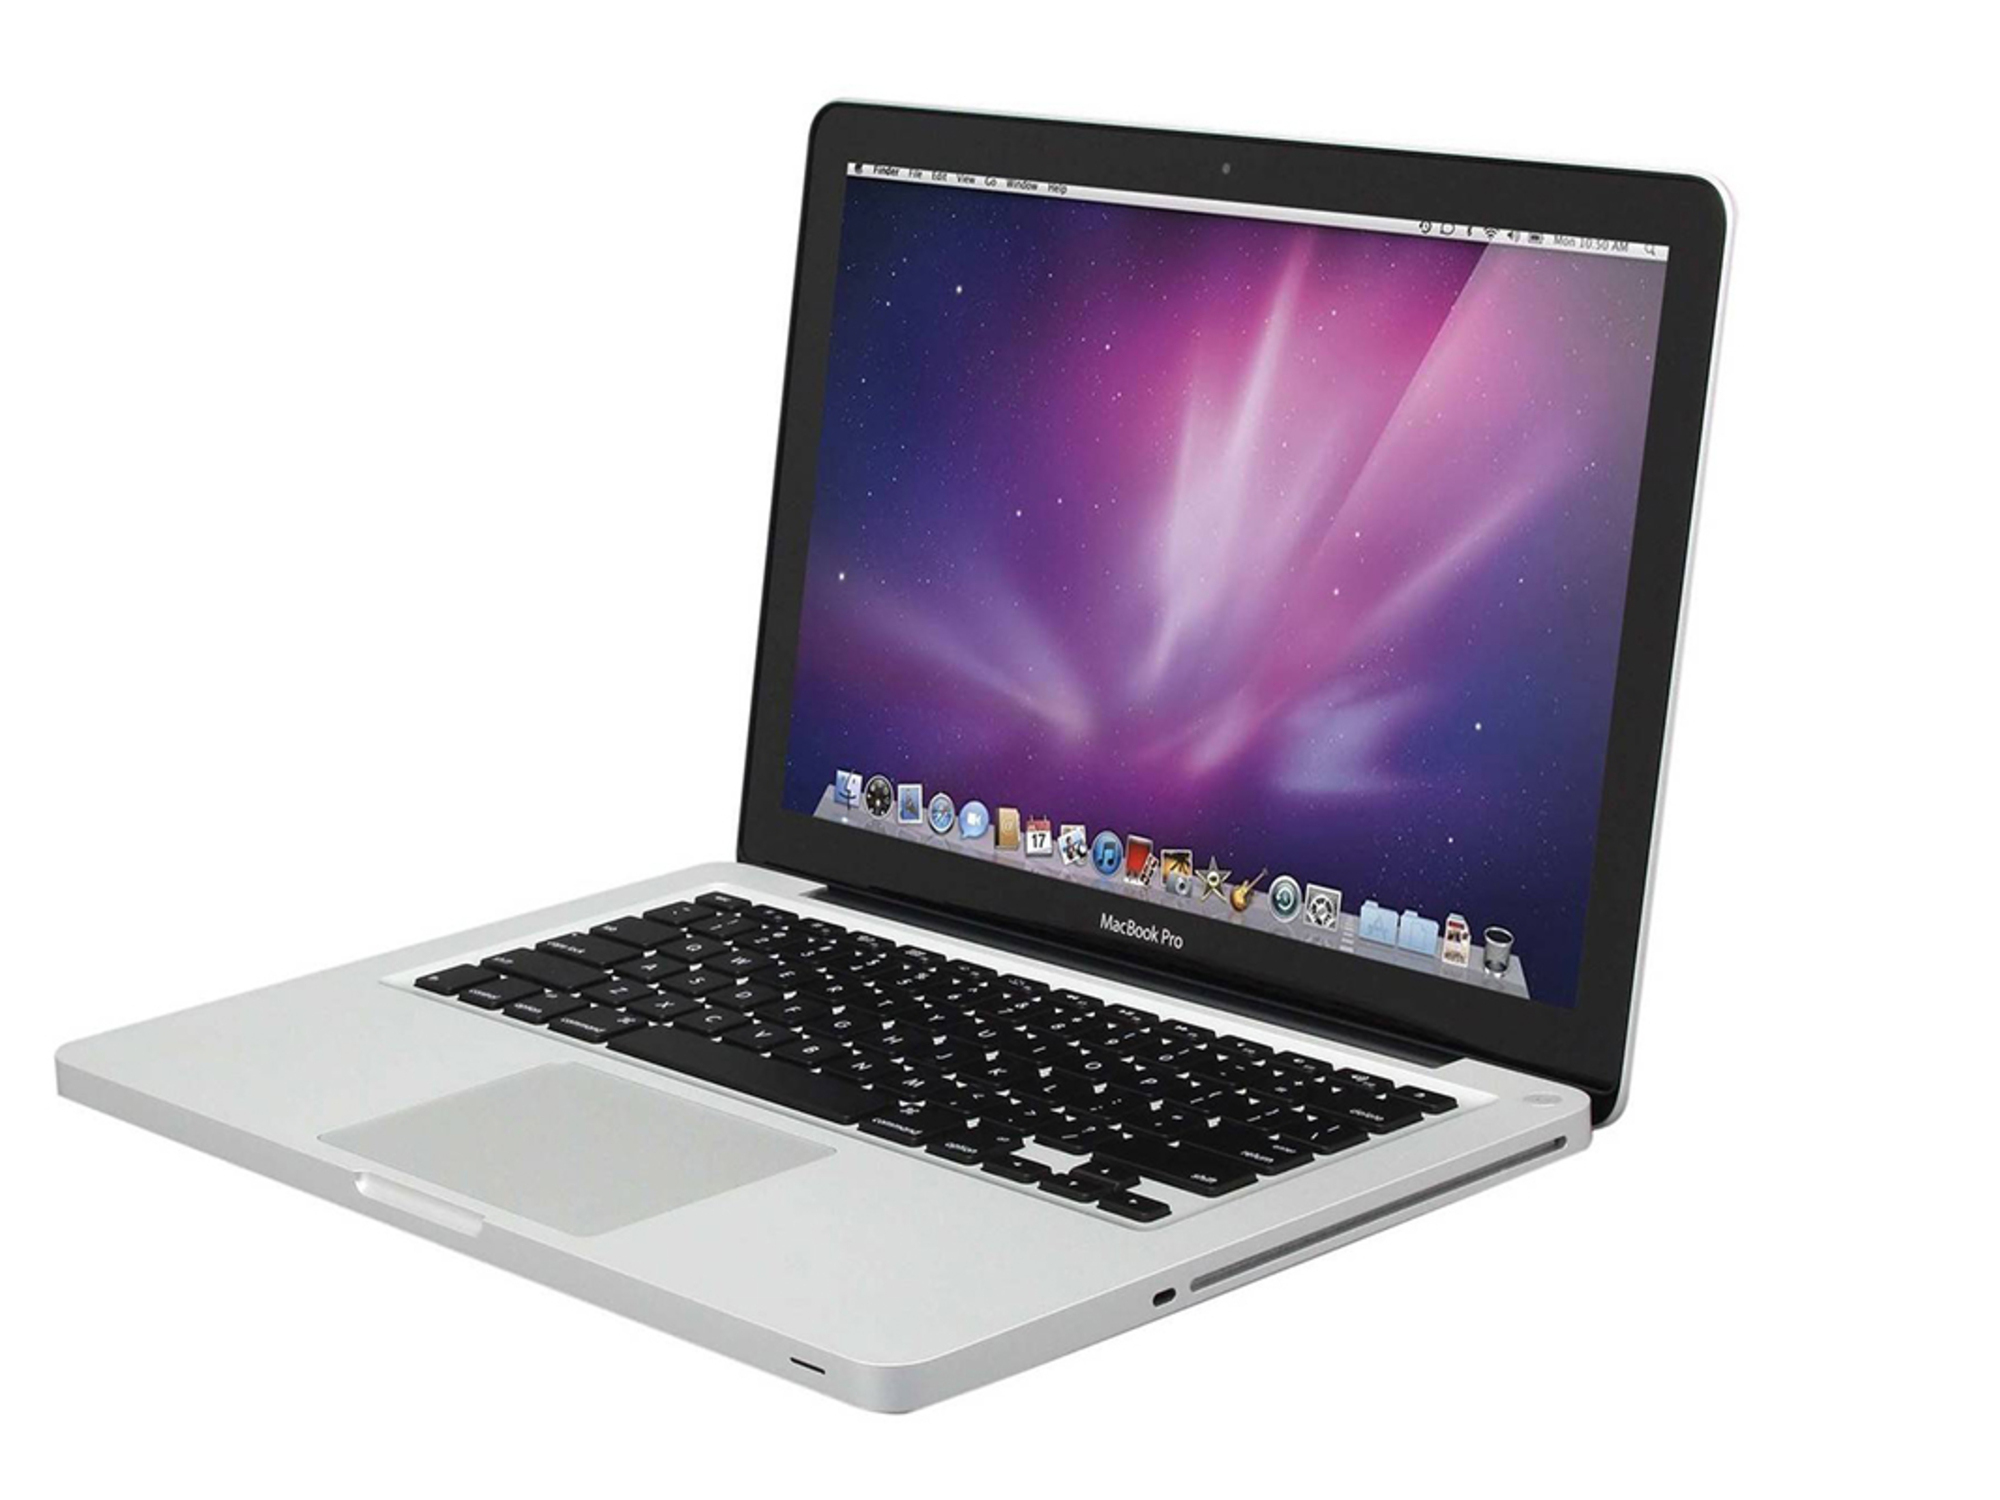 A refurbished MacBook Pro on a white background